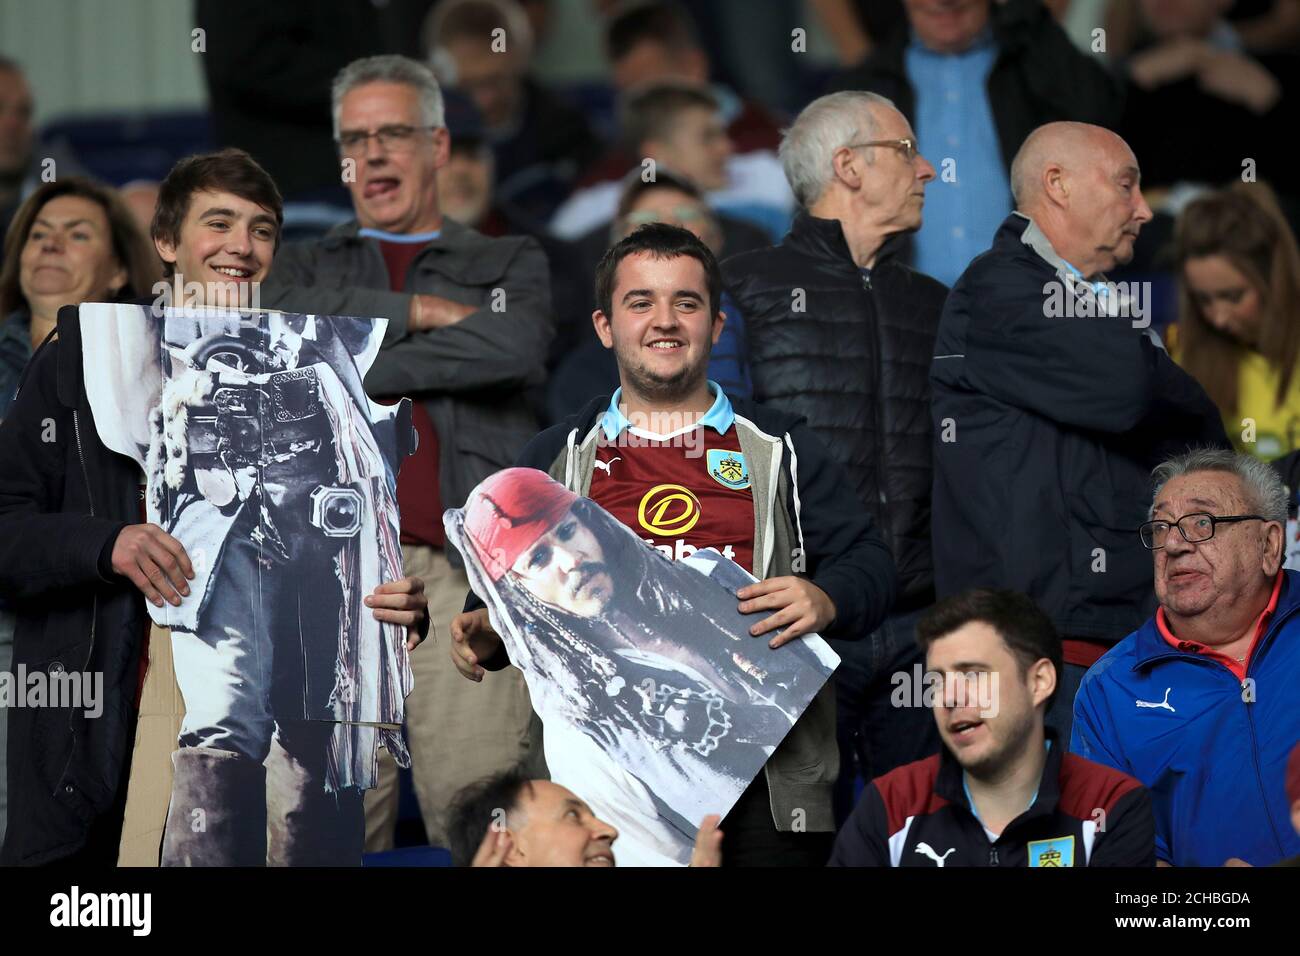 Burnley fans hold cardboard cut outs of Captain Jack Sparrow in the stands Stock Photo